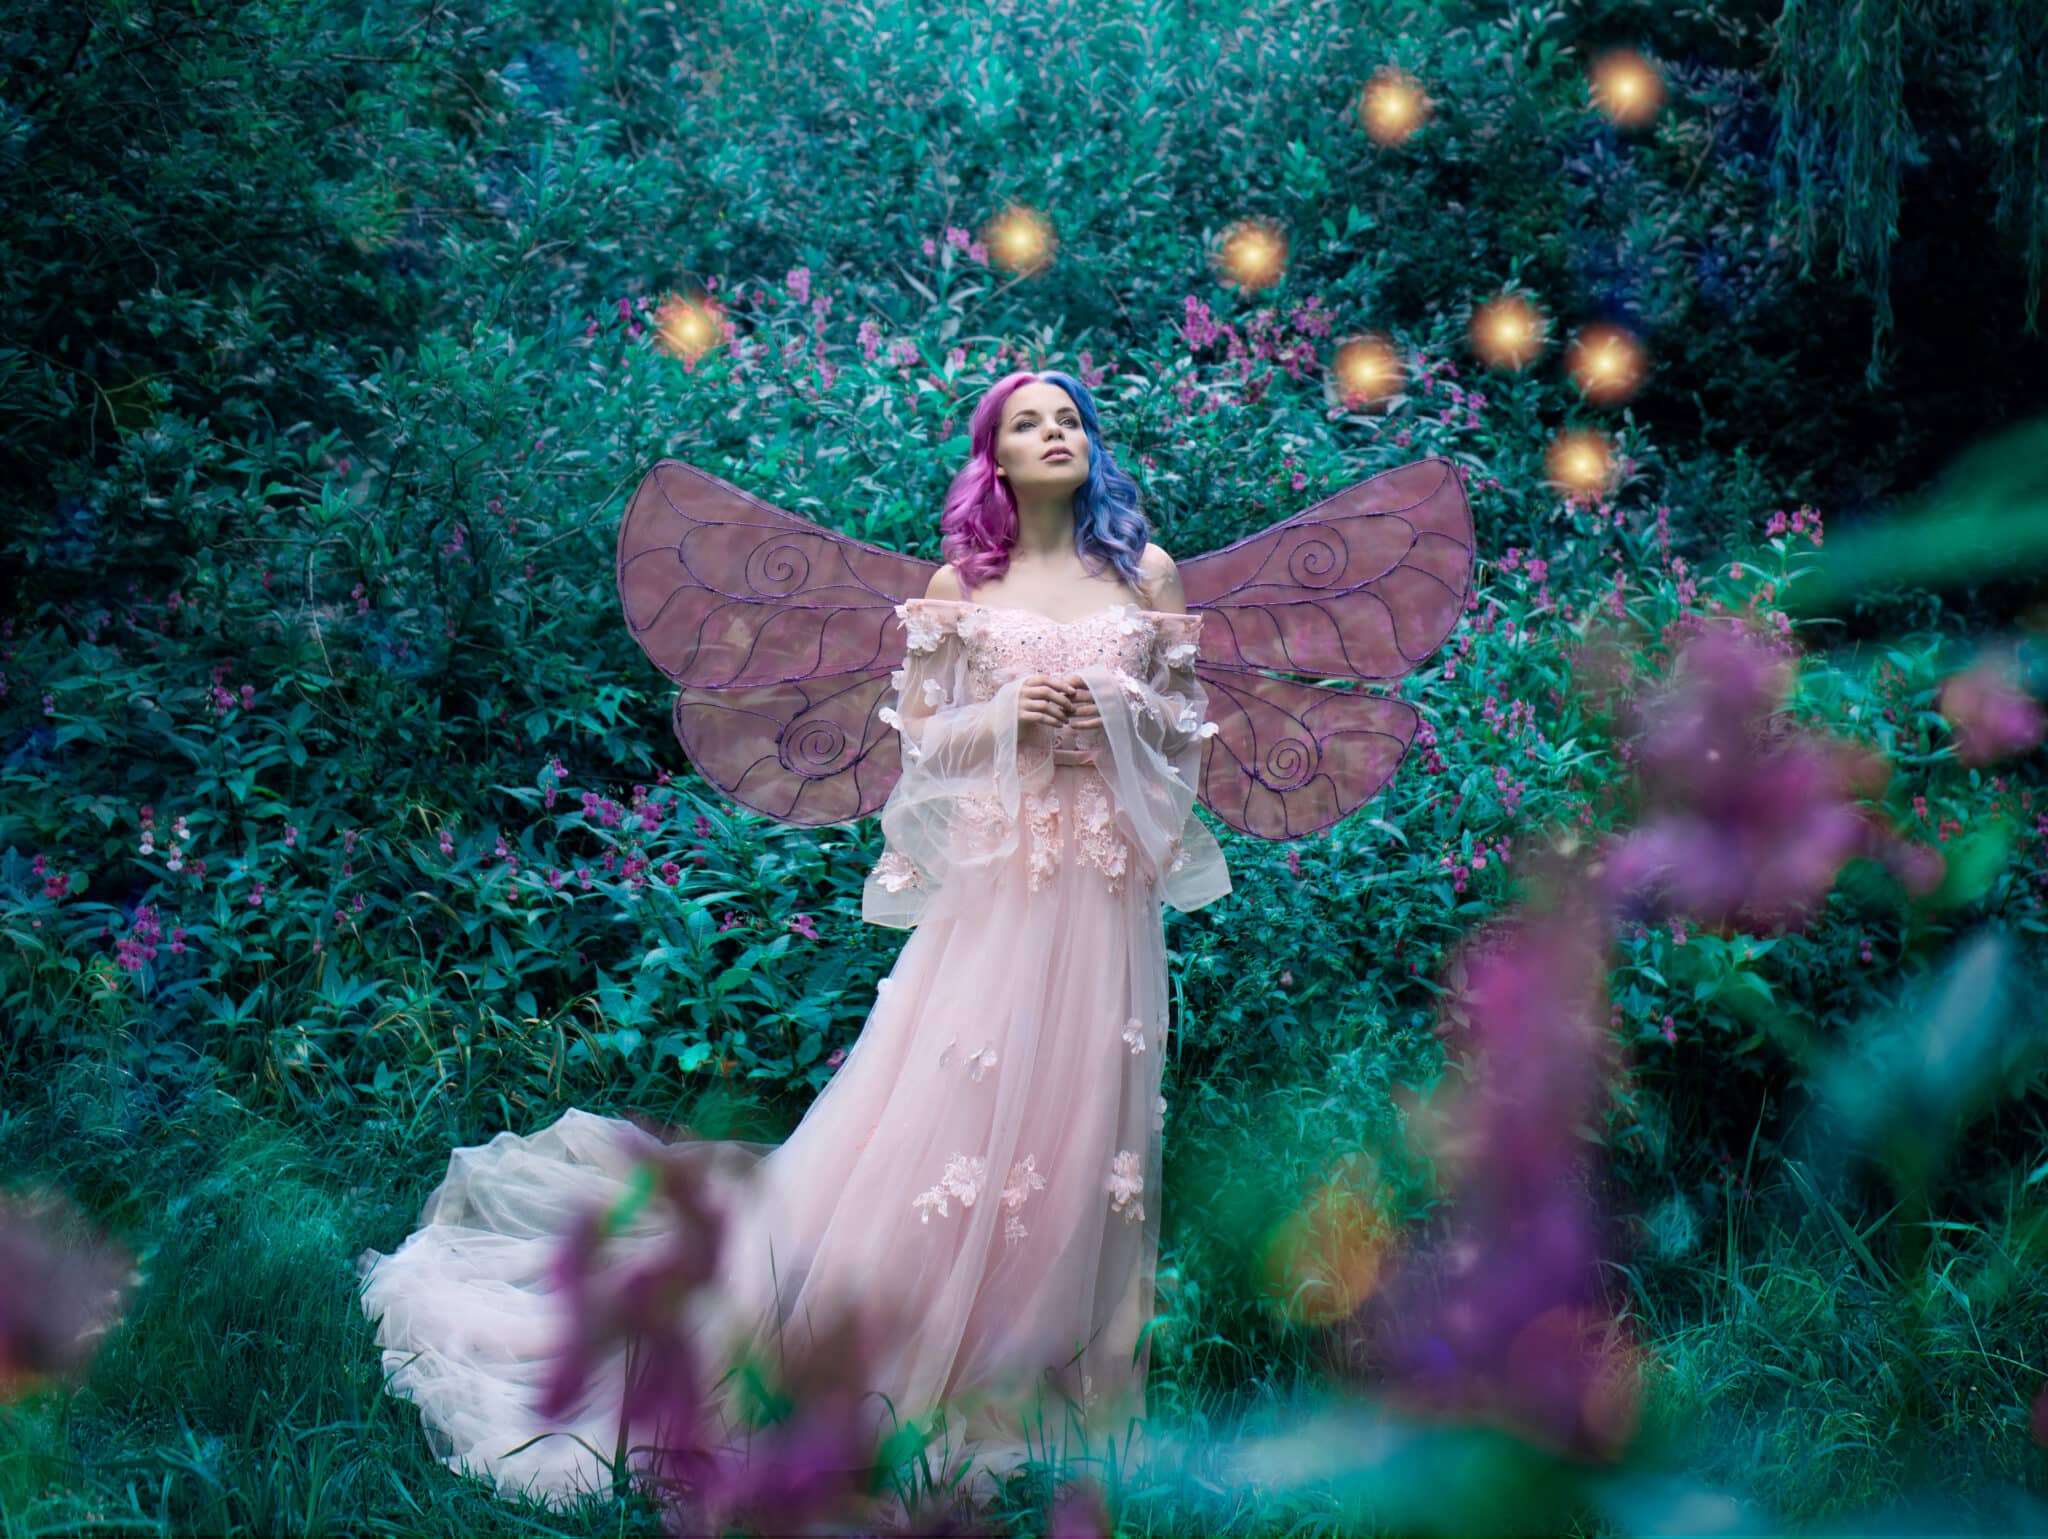 Art photo of a fairy fairy in a pink dress in the forest with fireflies